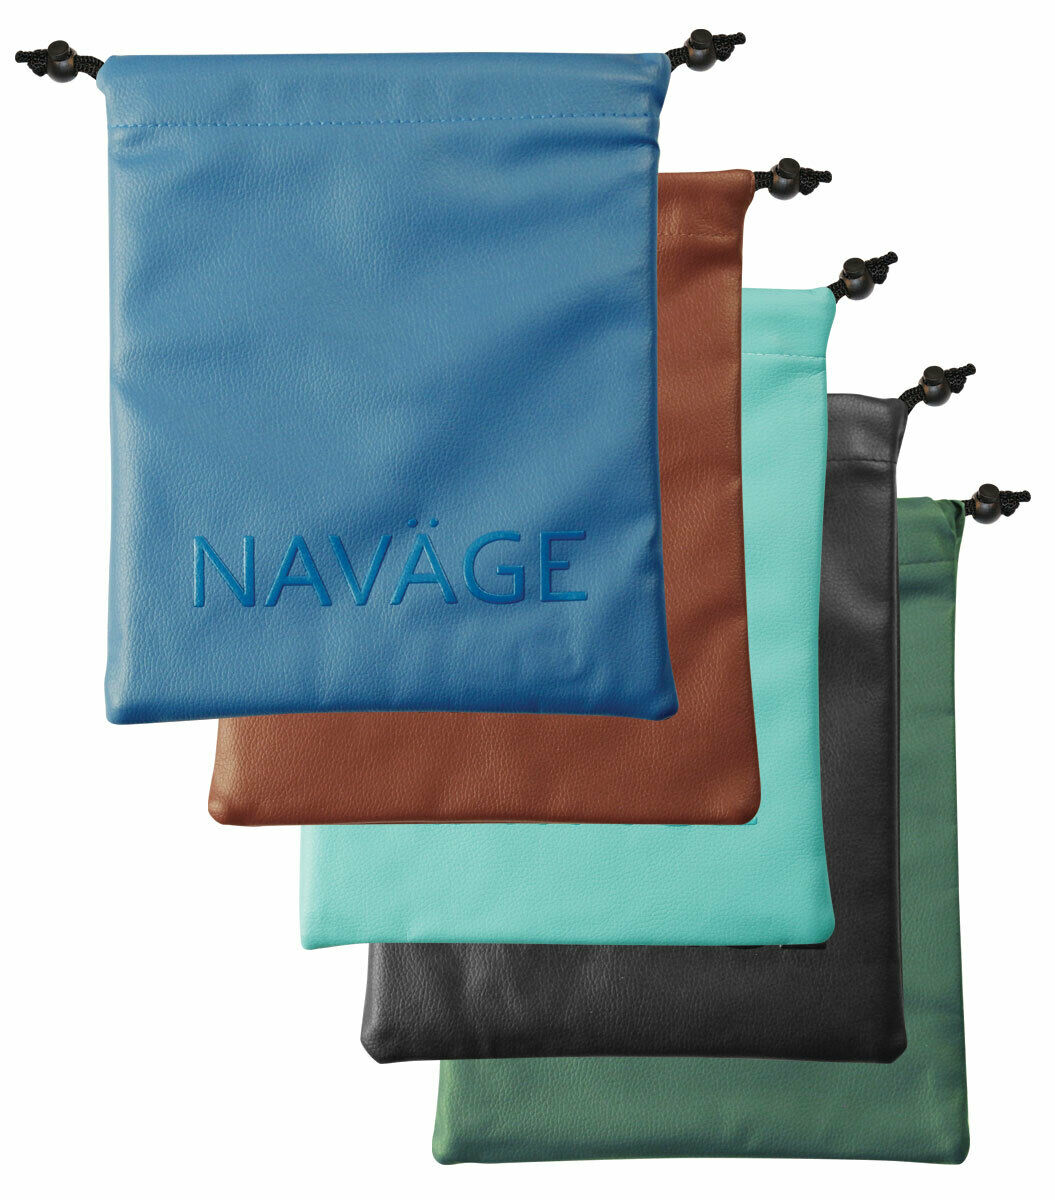 Navage Travel Bag (for Use With The Navage Nose Cleaner)